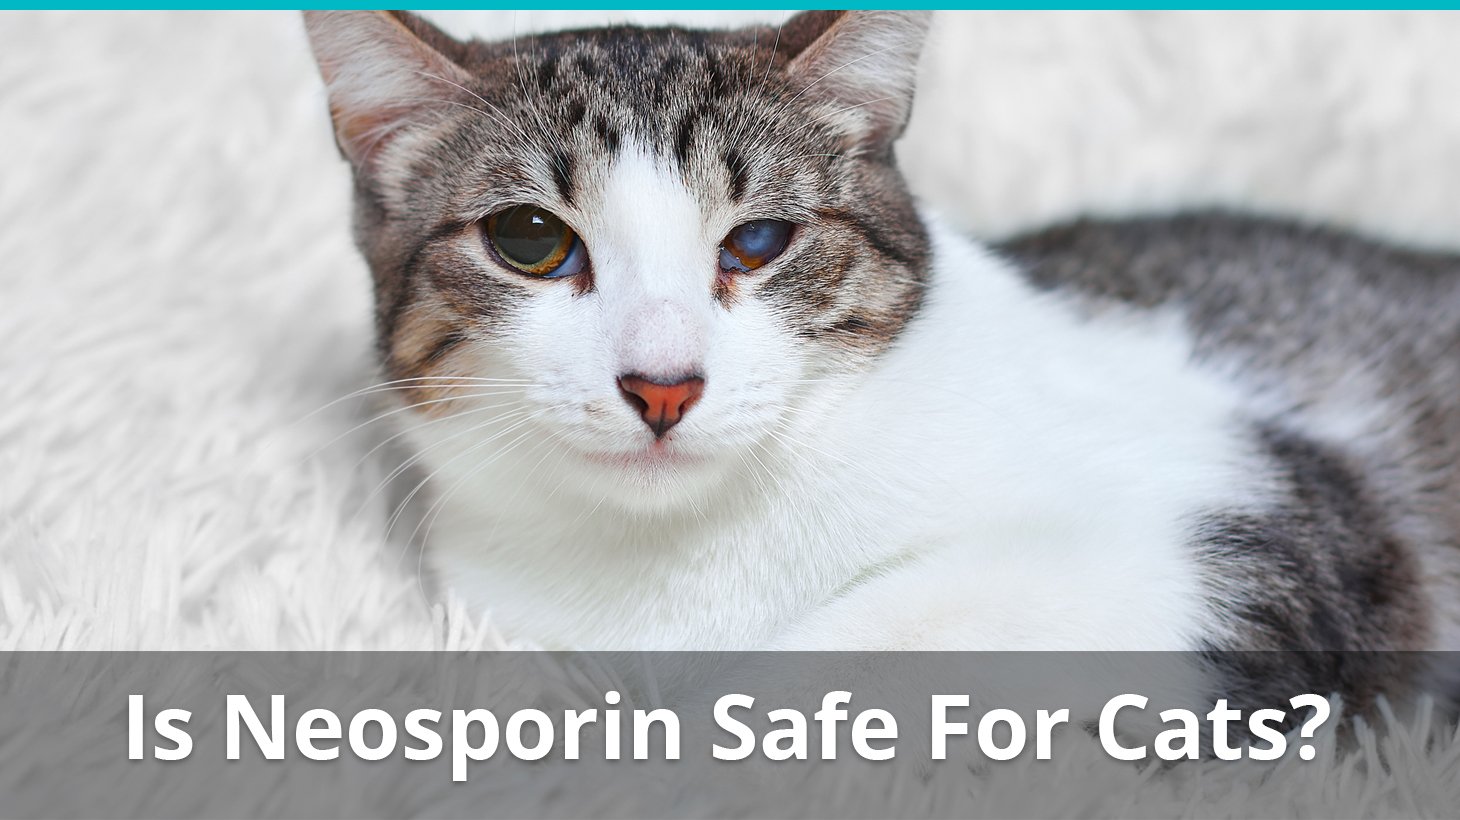 Neosporin For Cat Wound Care Is It Safe? Can You Use It?